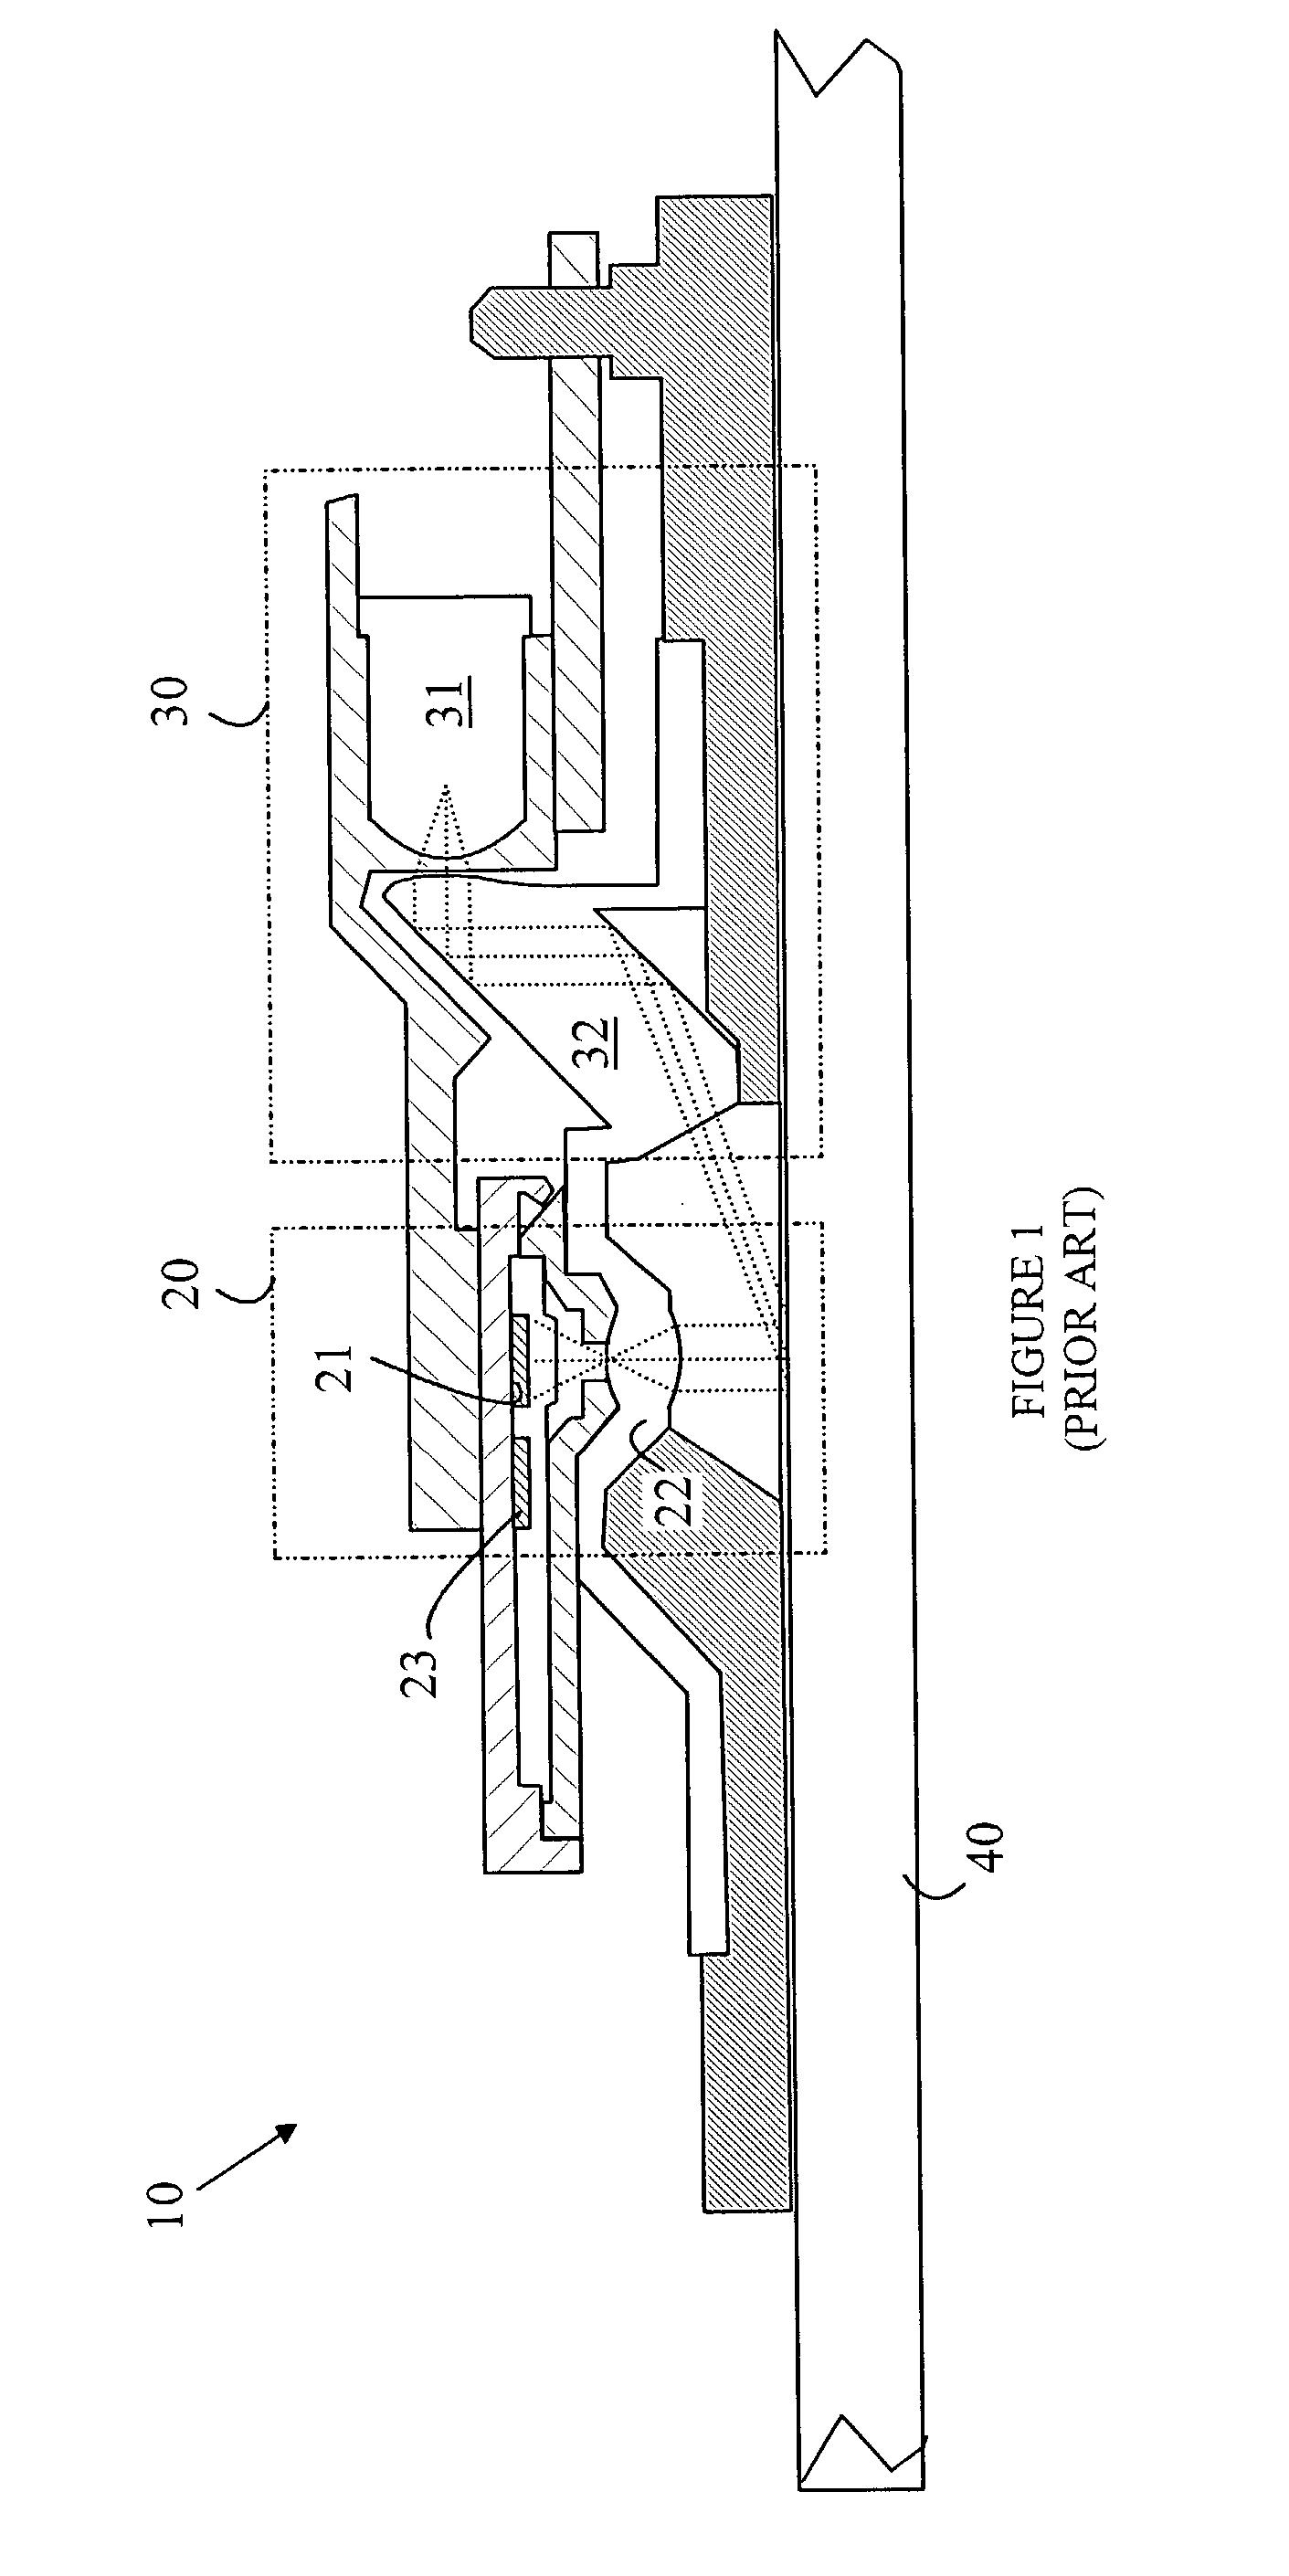 Optical mouse adapted for use on glass surfaces